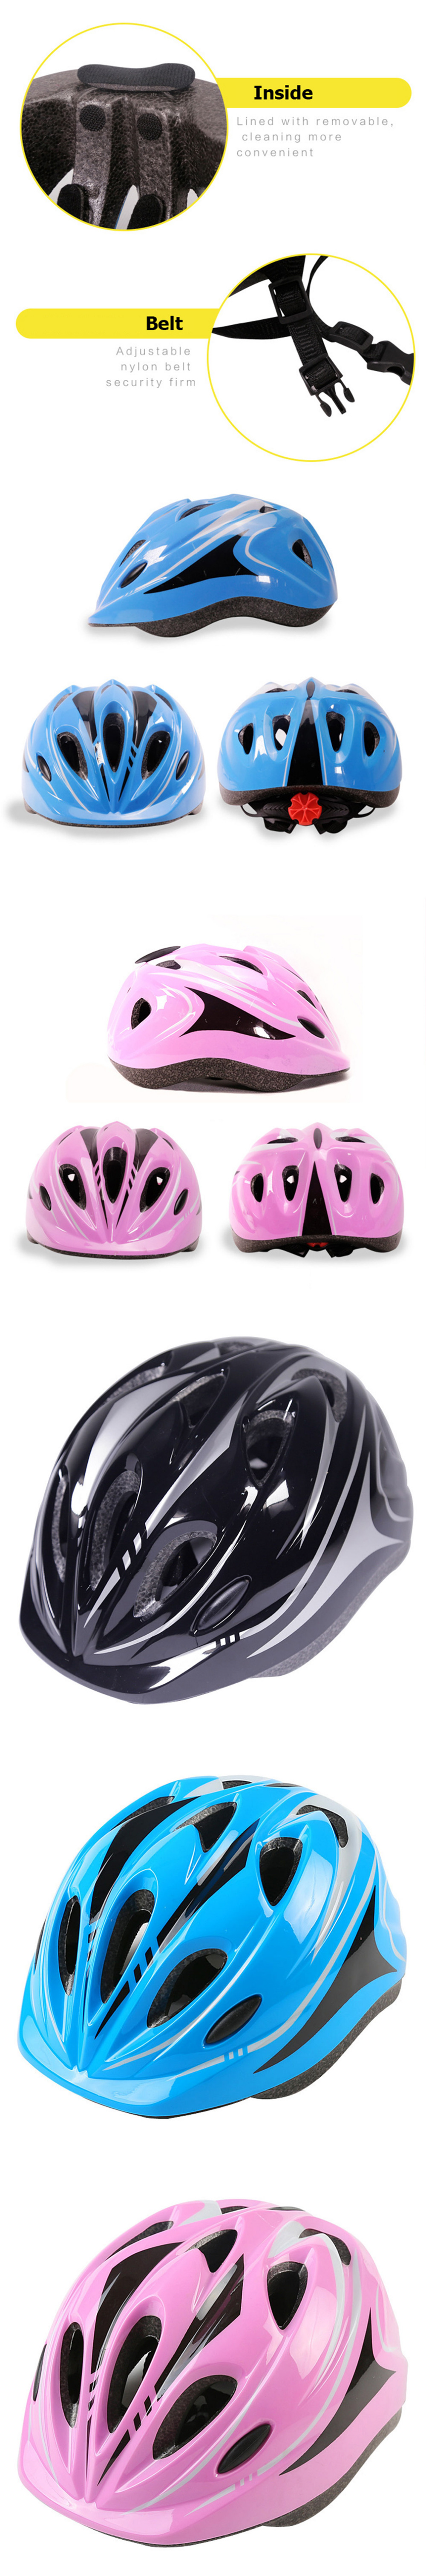 EPS-Ultralight-Kids-MTB-Road-Bike-Helmets-Children-Breathable-Bicycle-Helmet-Safety-Head-Protect-For-1708022-2